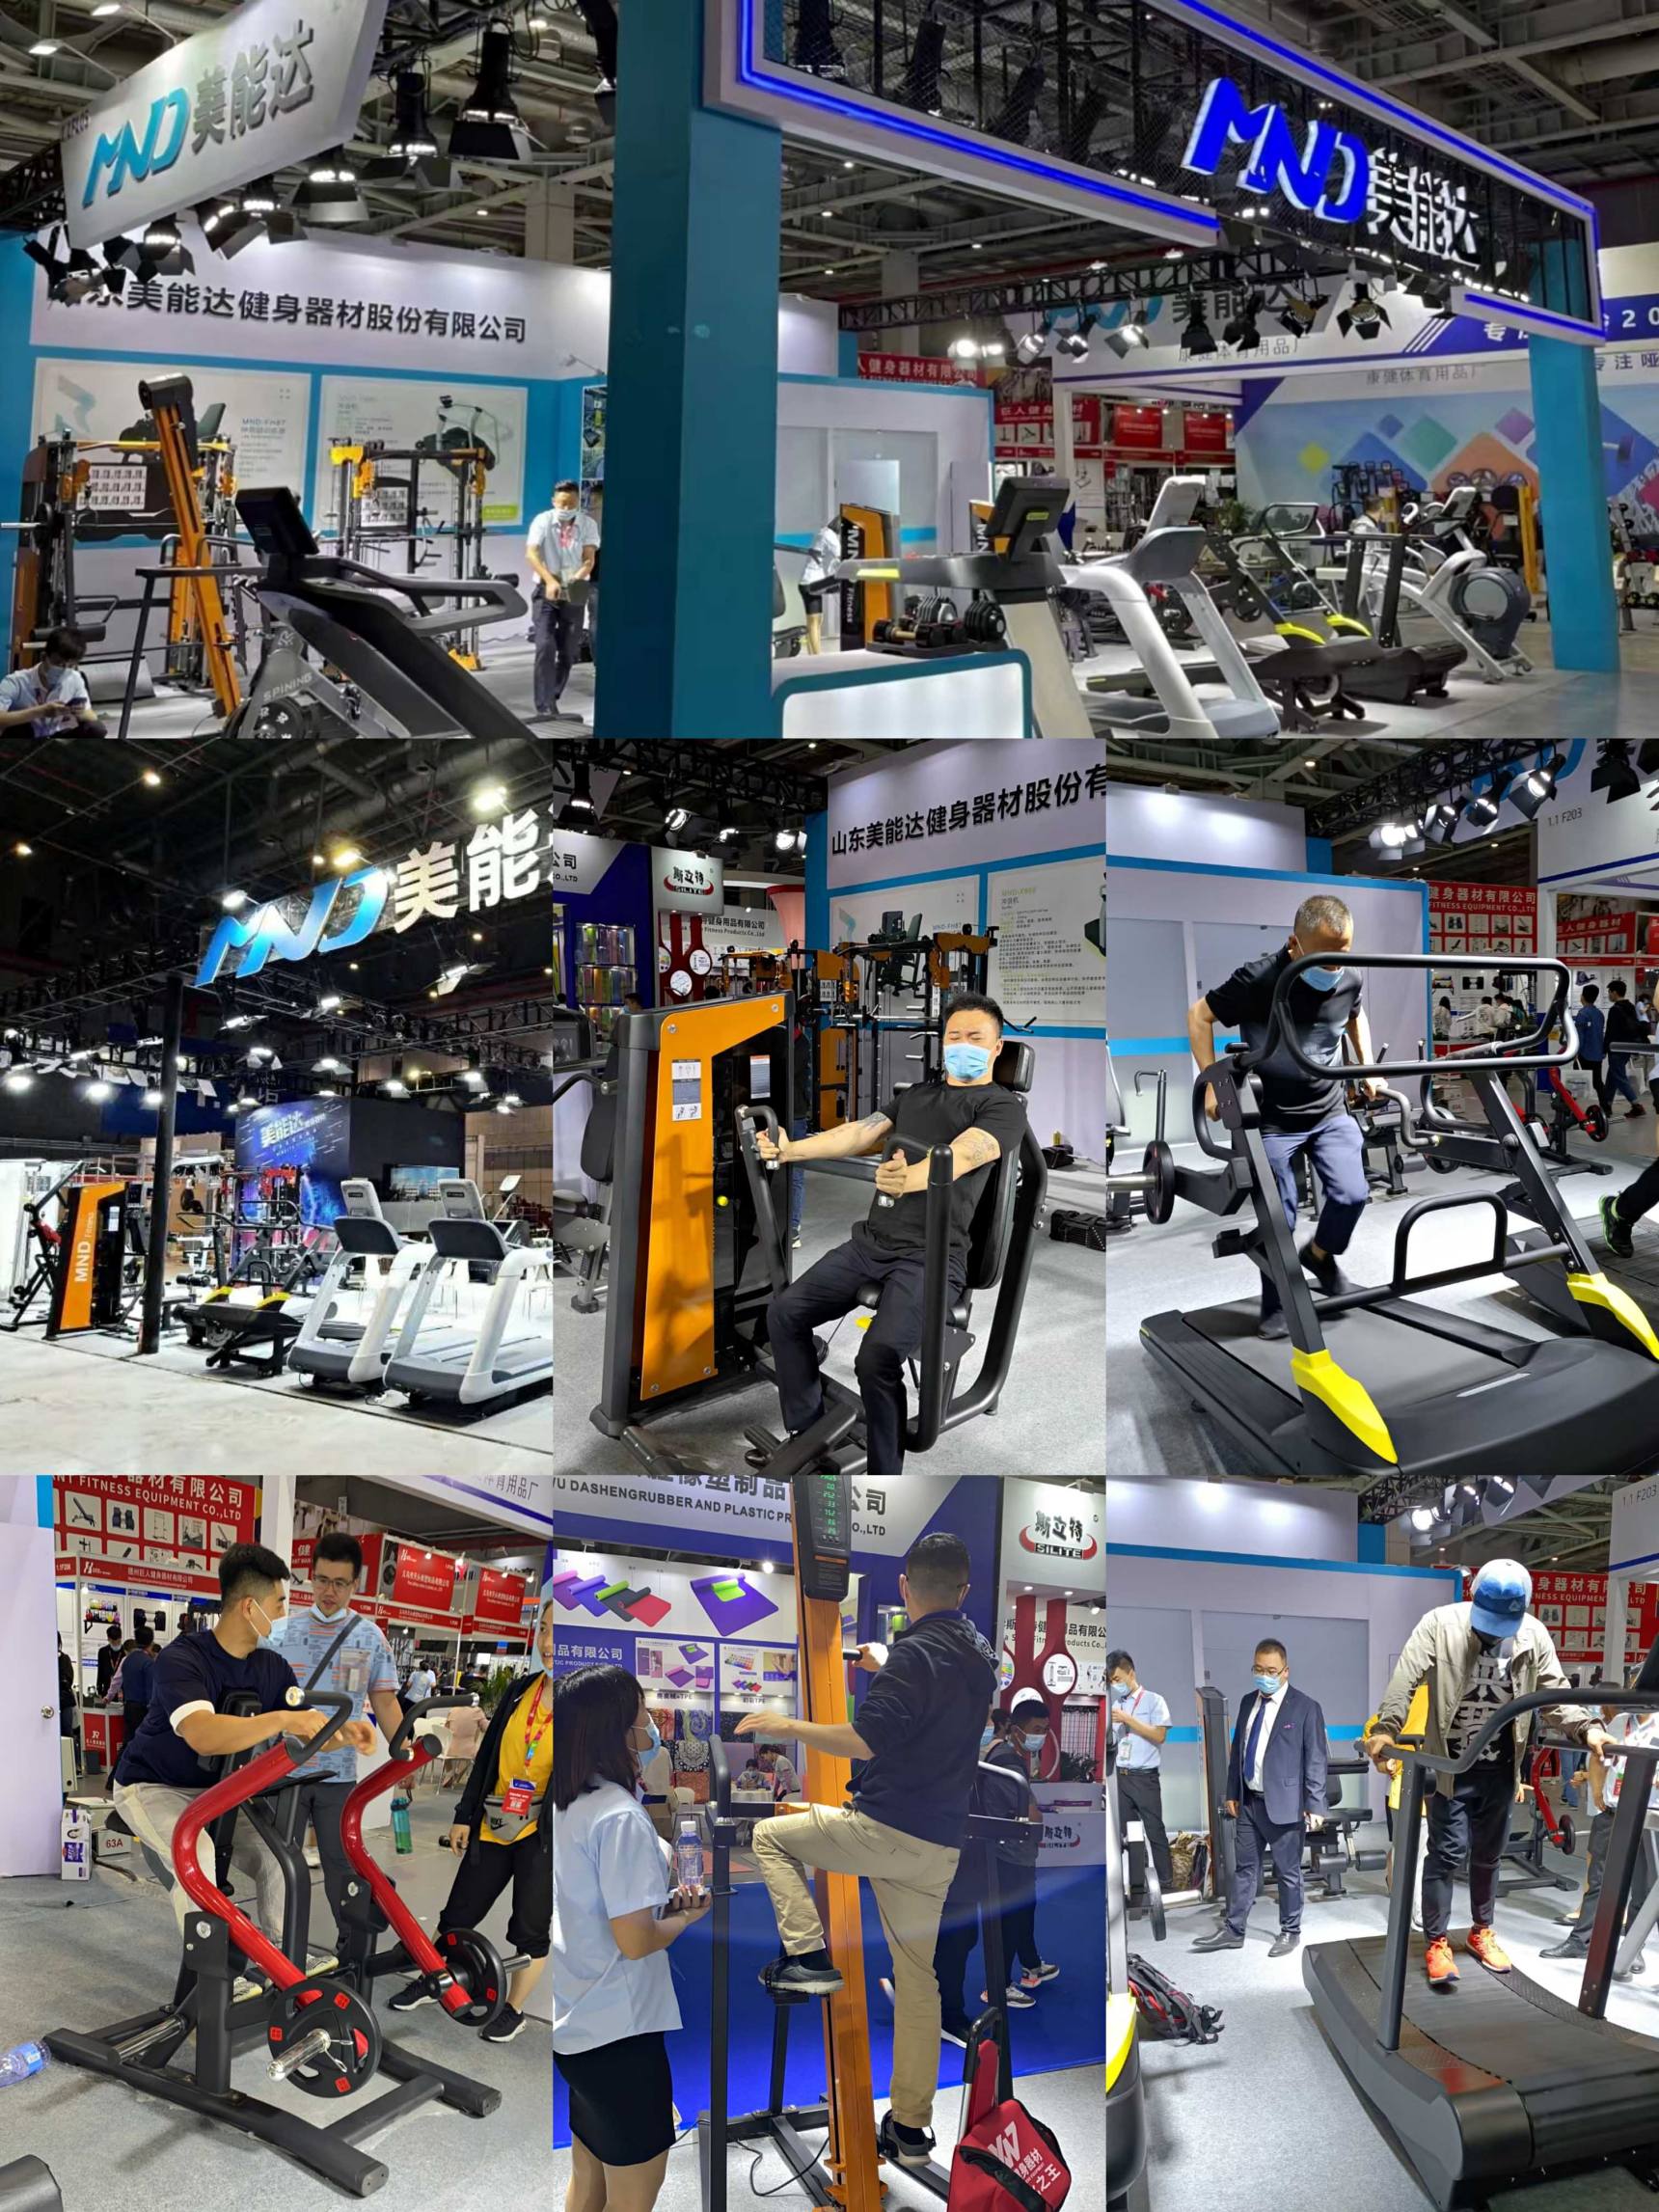 Professional Commercial Multi Gym Machine Multifunctional Pull Up Station Trainer Bench Press body building machine